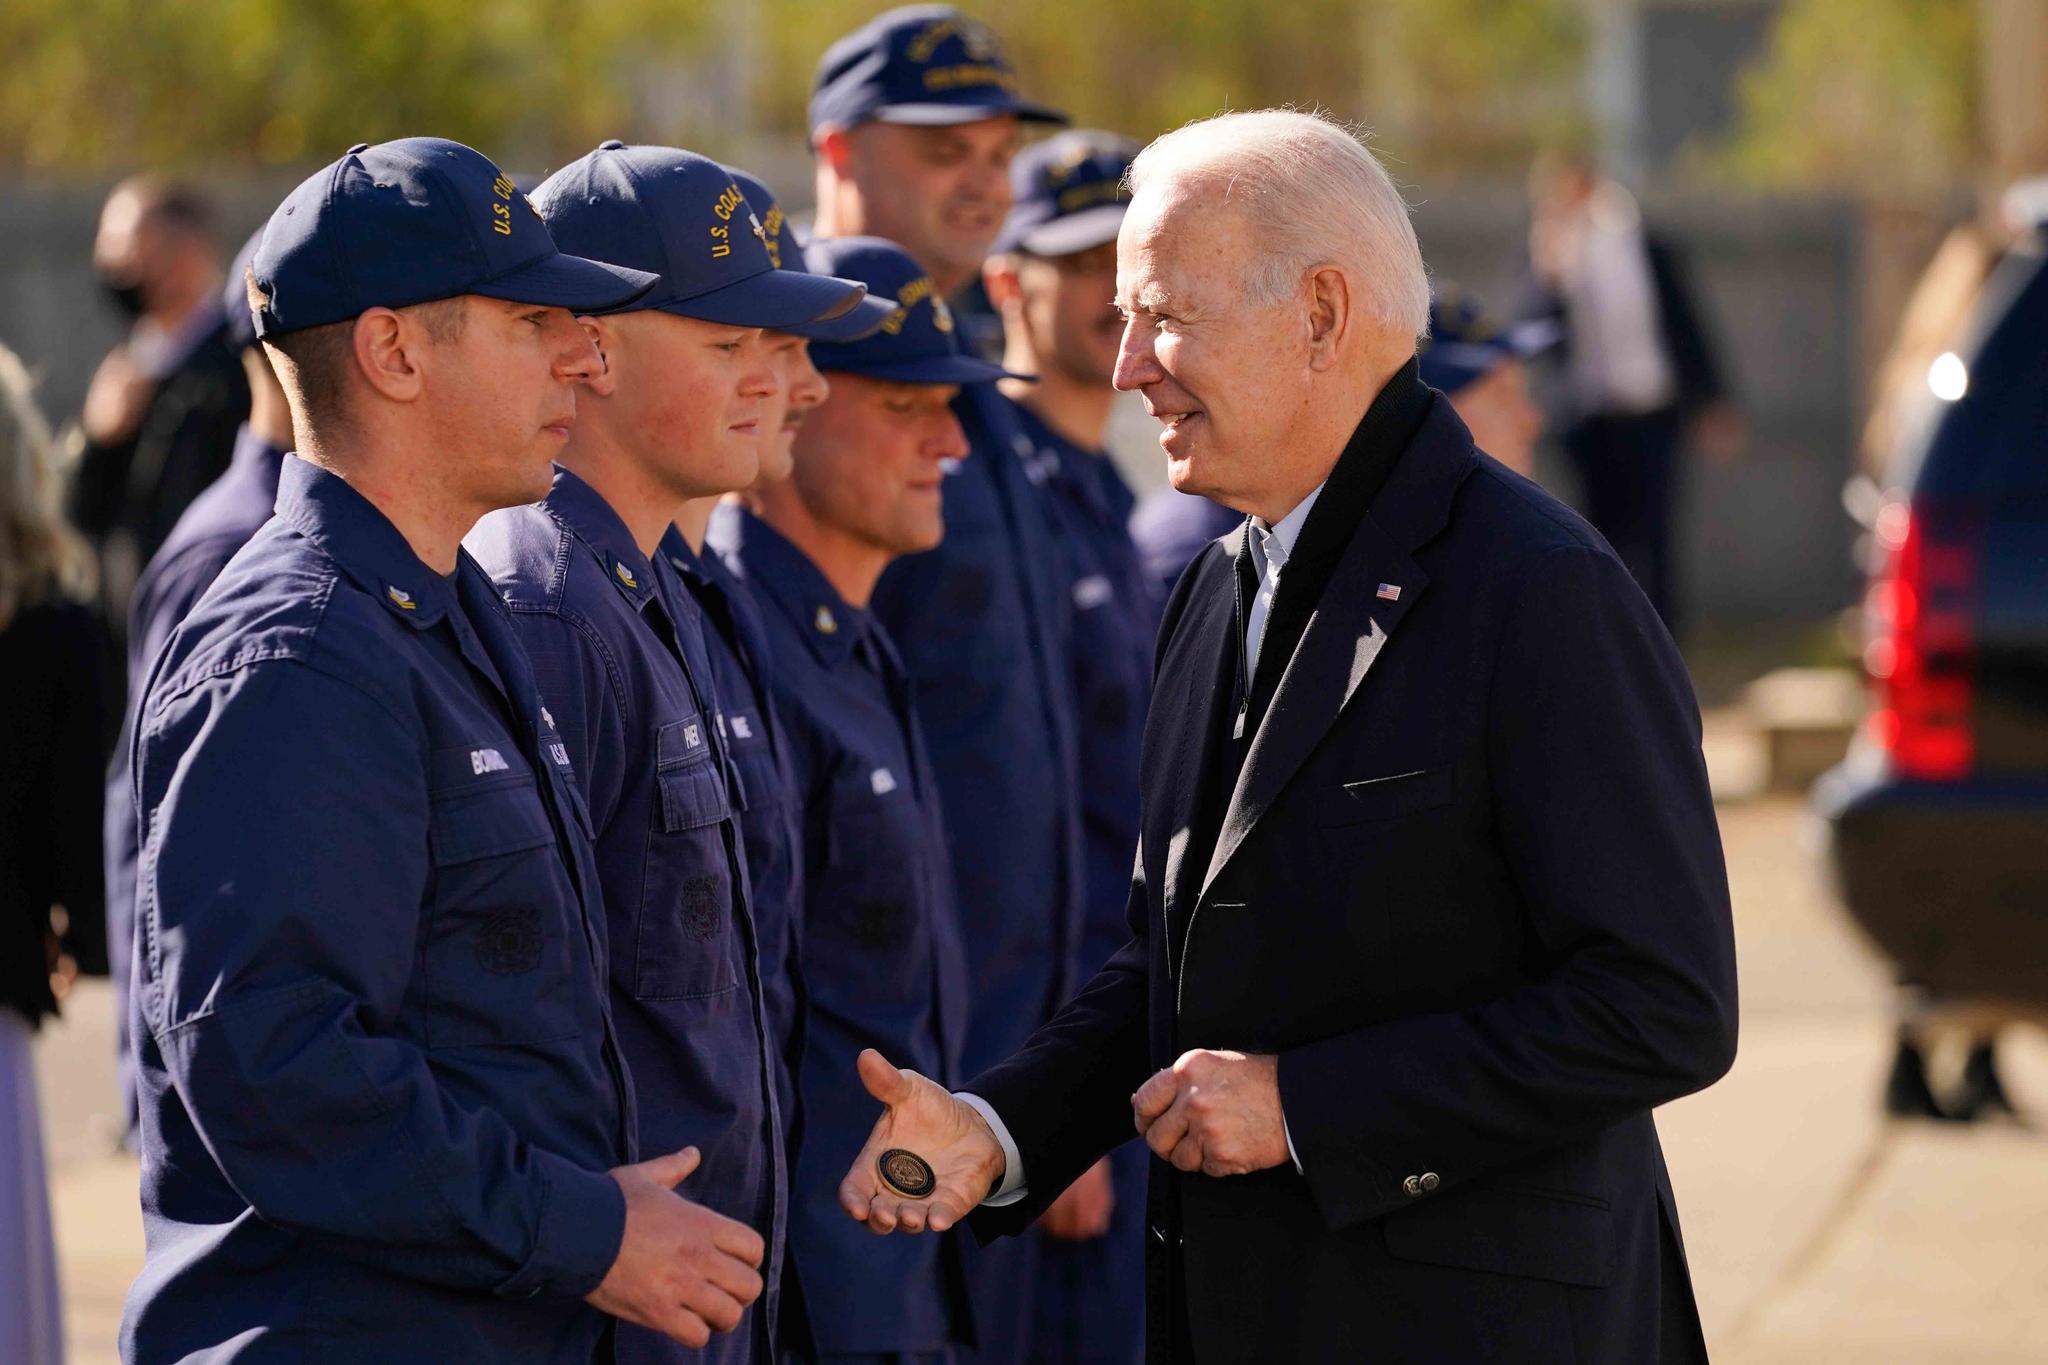 President Joe Biden hands out a challenge coin as he speaks with members of the coast guard at the United States Coast Guard Station Brant Point in Nantucket, Mass., Thursday, Nov. 25, 2021.